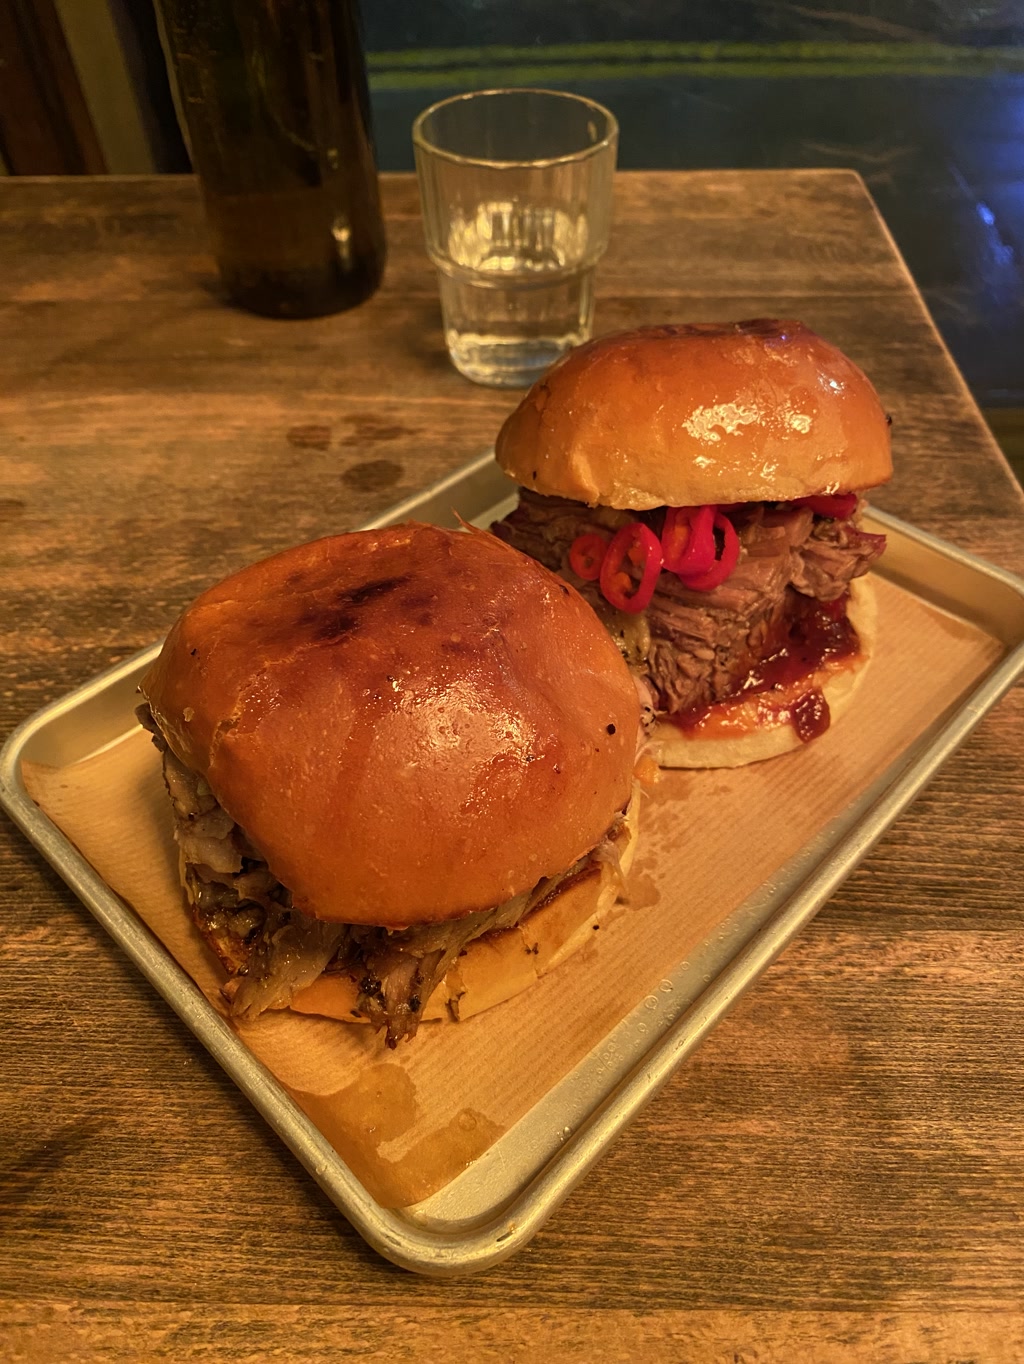 The photo shows two sizeable burgers served on a metal tray with a piece of parchment paper underneath. The buns appear shiny and toasted, indicating they might be brioche buns. The burger in the foreground has a generous amount of caramelized onions on top of a well-cooked piece of meat, which could likely be pulled pork or beef, based on the texture. The other burger, slightly behind the first, features vibrant pickled red onions atop the meat, adding a pop of color and likely a tangy flavor. Side items are not visible in the view. In the background, a bottle and a half-full glass of a clear liquid, possibly water, are present on the rustic wooden table.